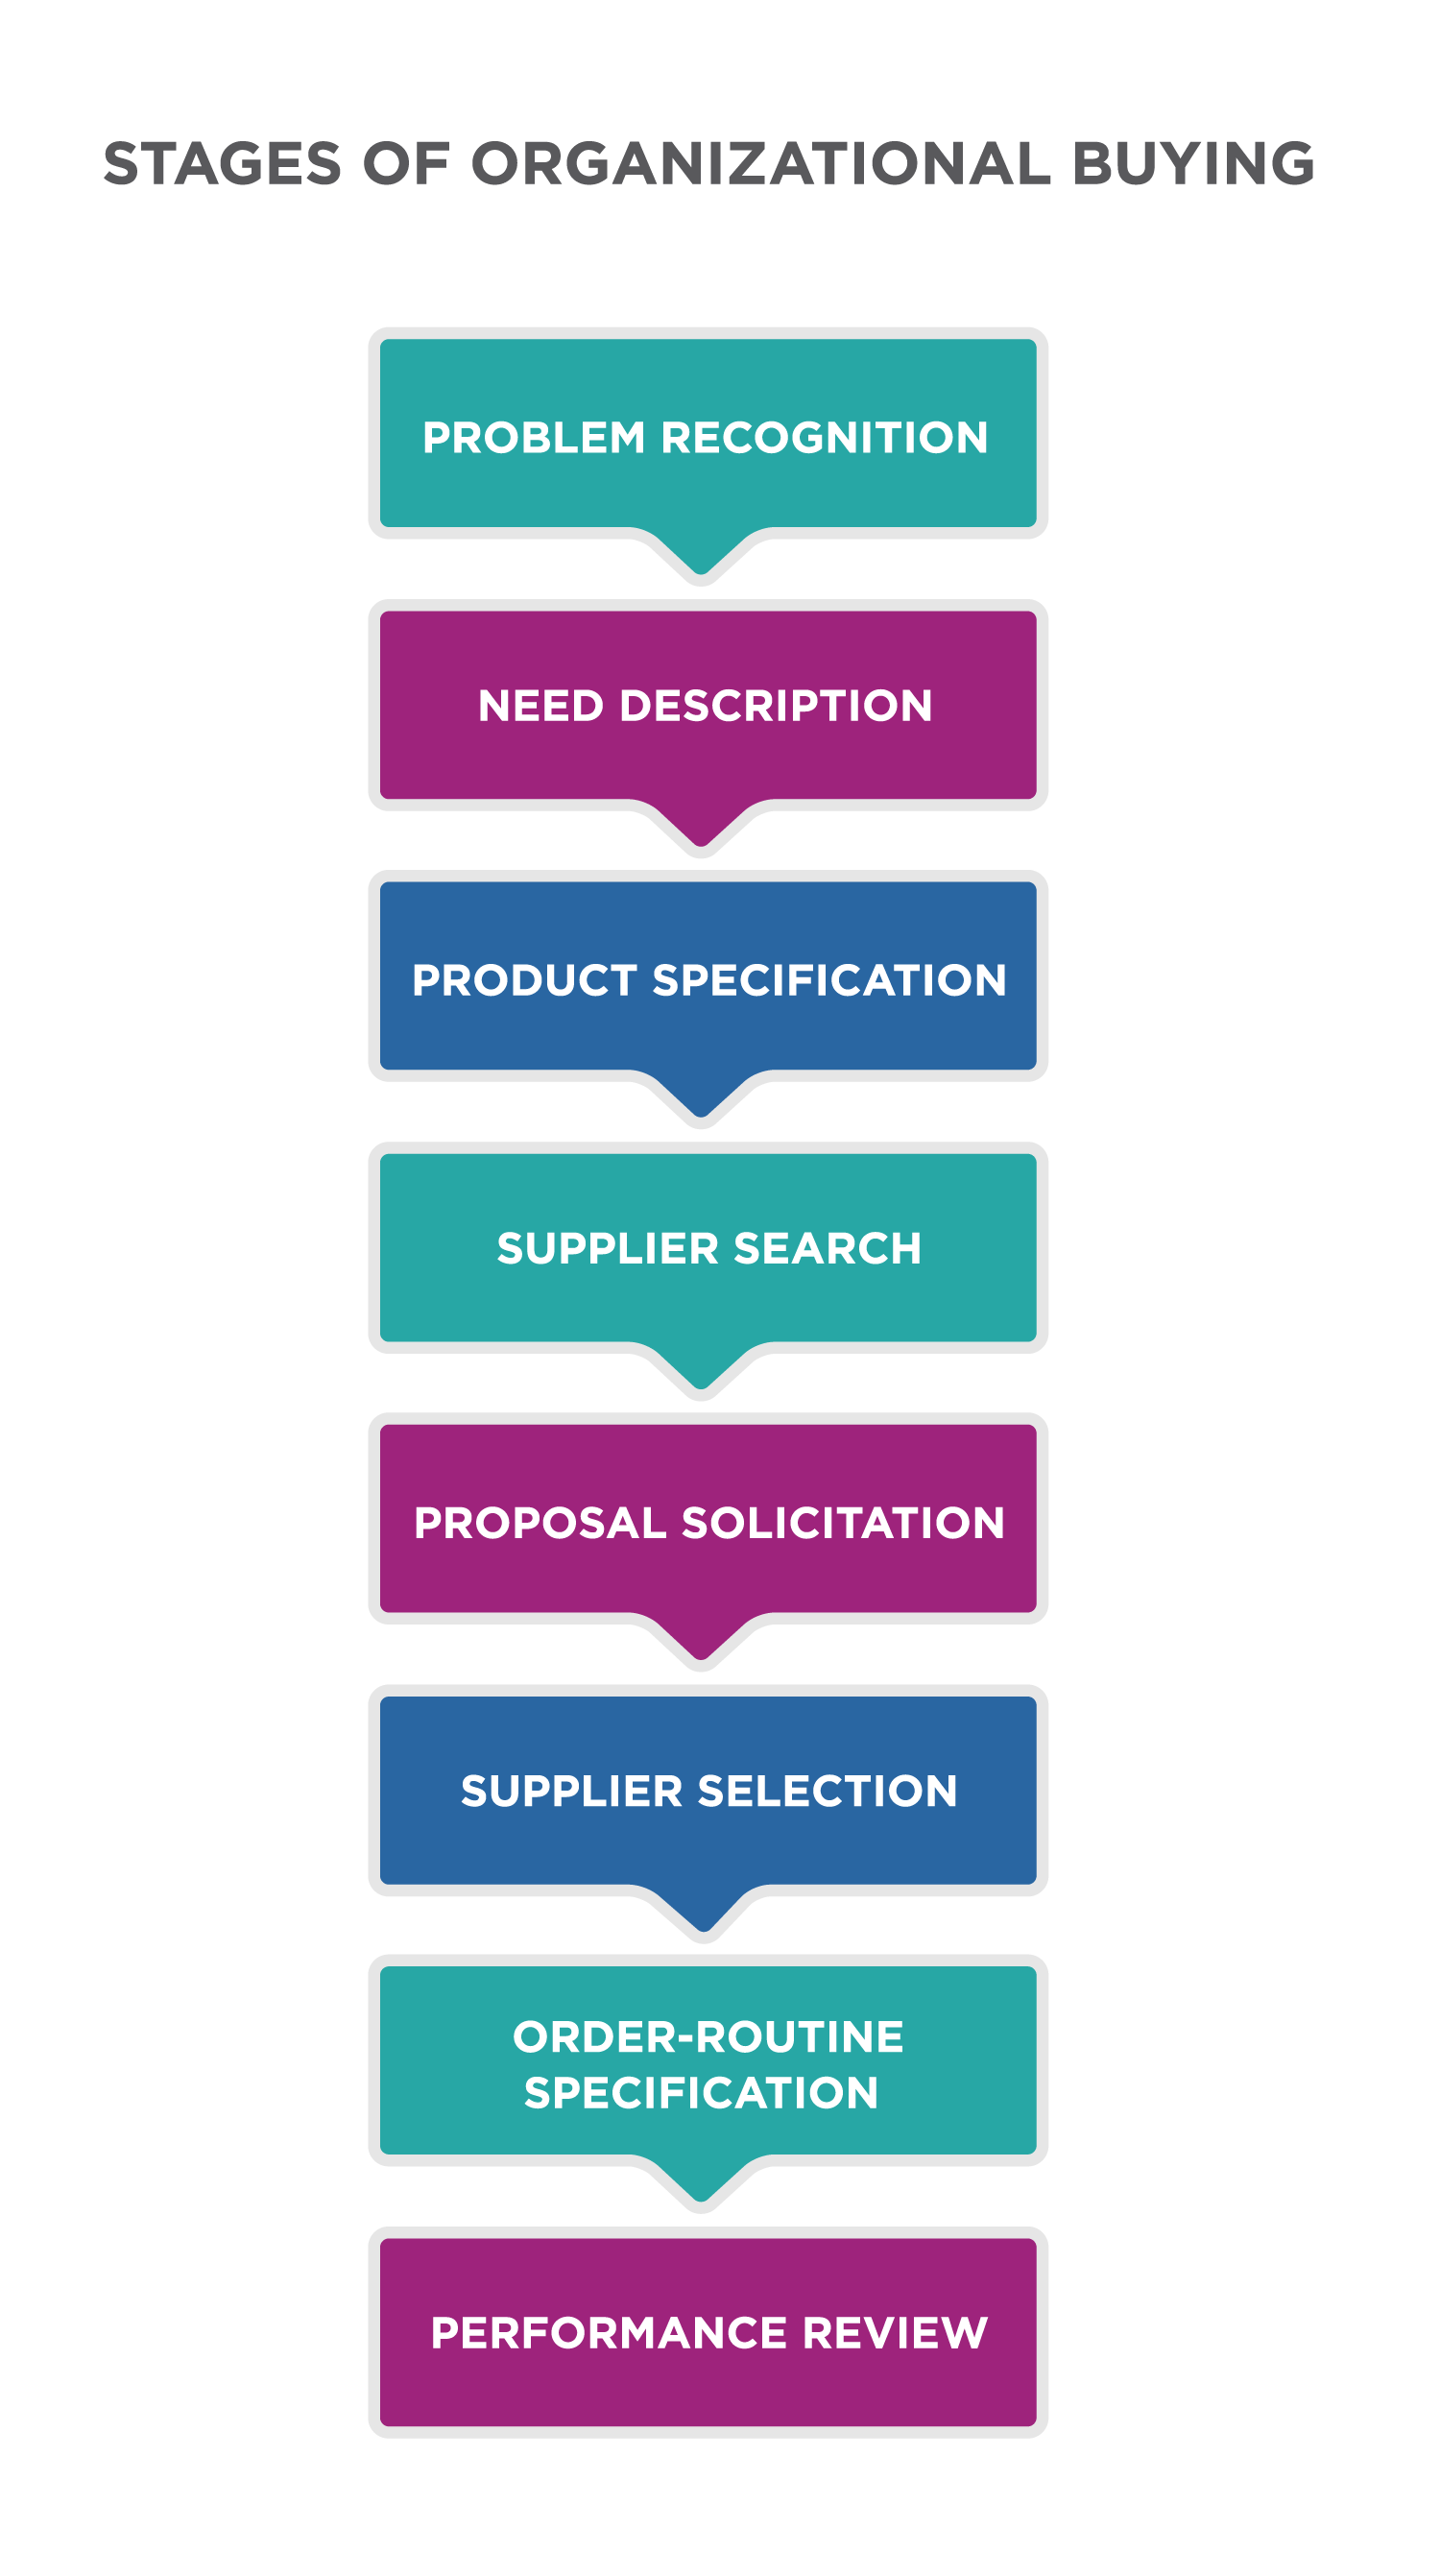 Stages of Organizational Buying. There are eight stages in this chart. Problem recognition leads to need description, which leads to product specification, which leads to supplier search, which leads to proposal solicitation, which leads to supplier selection, which leads to order-routine specification, which leads to performance review.